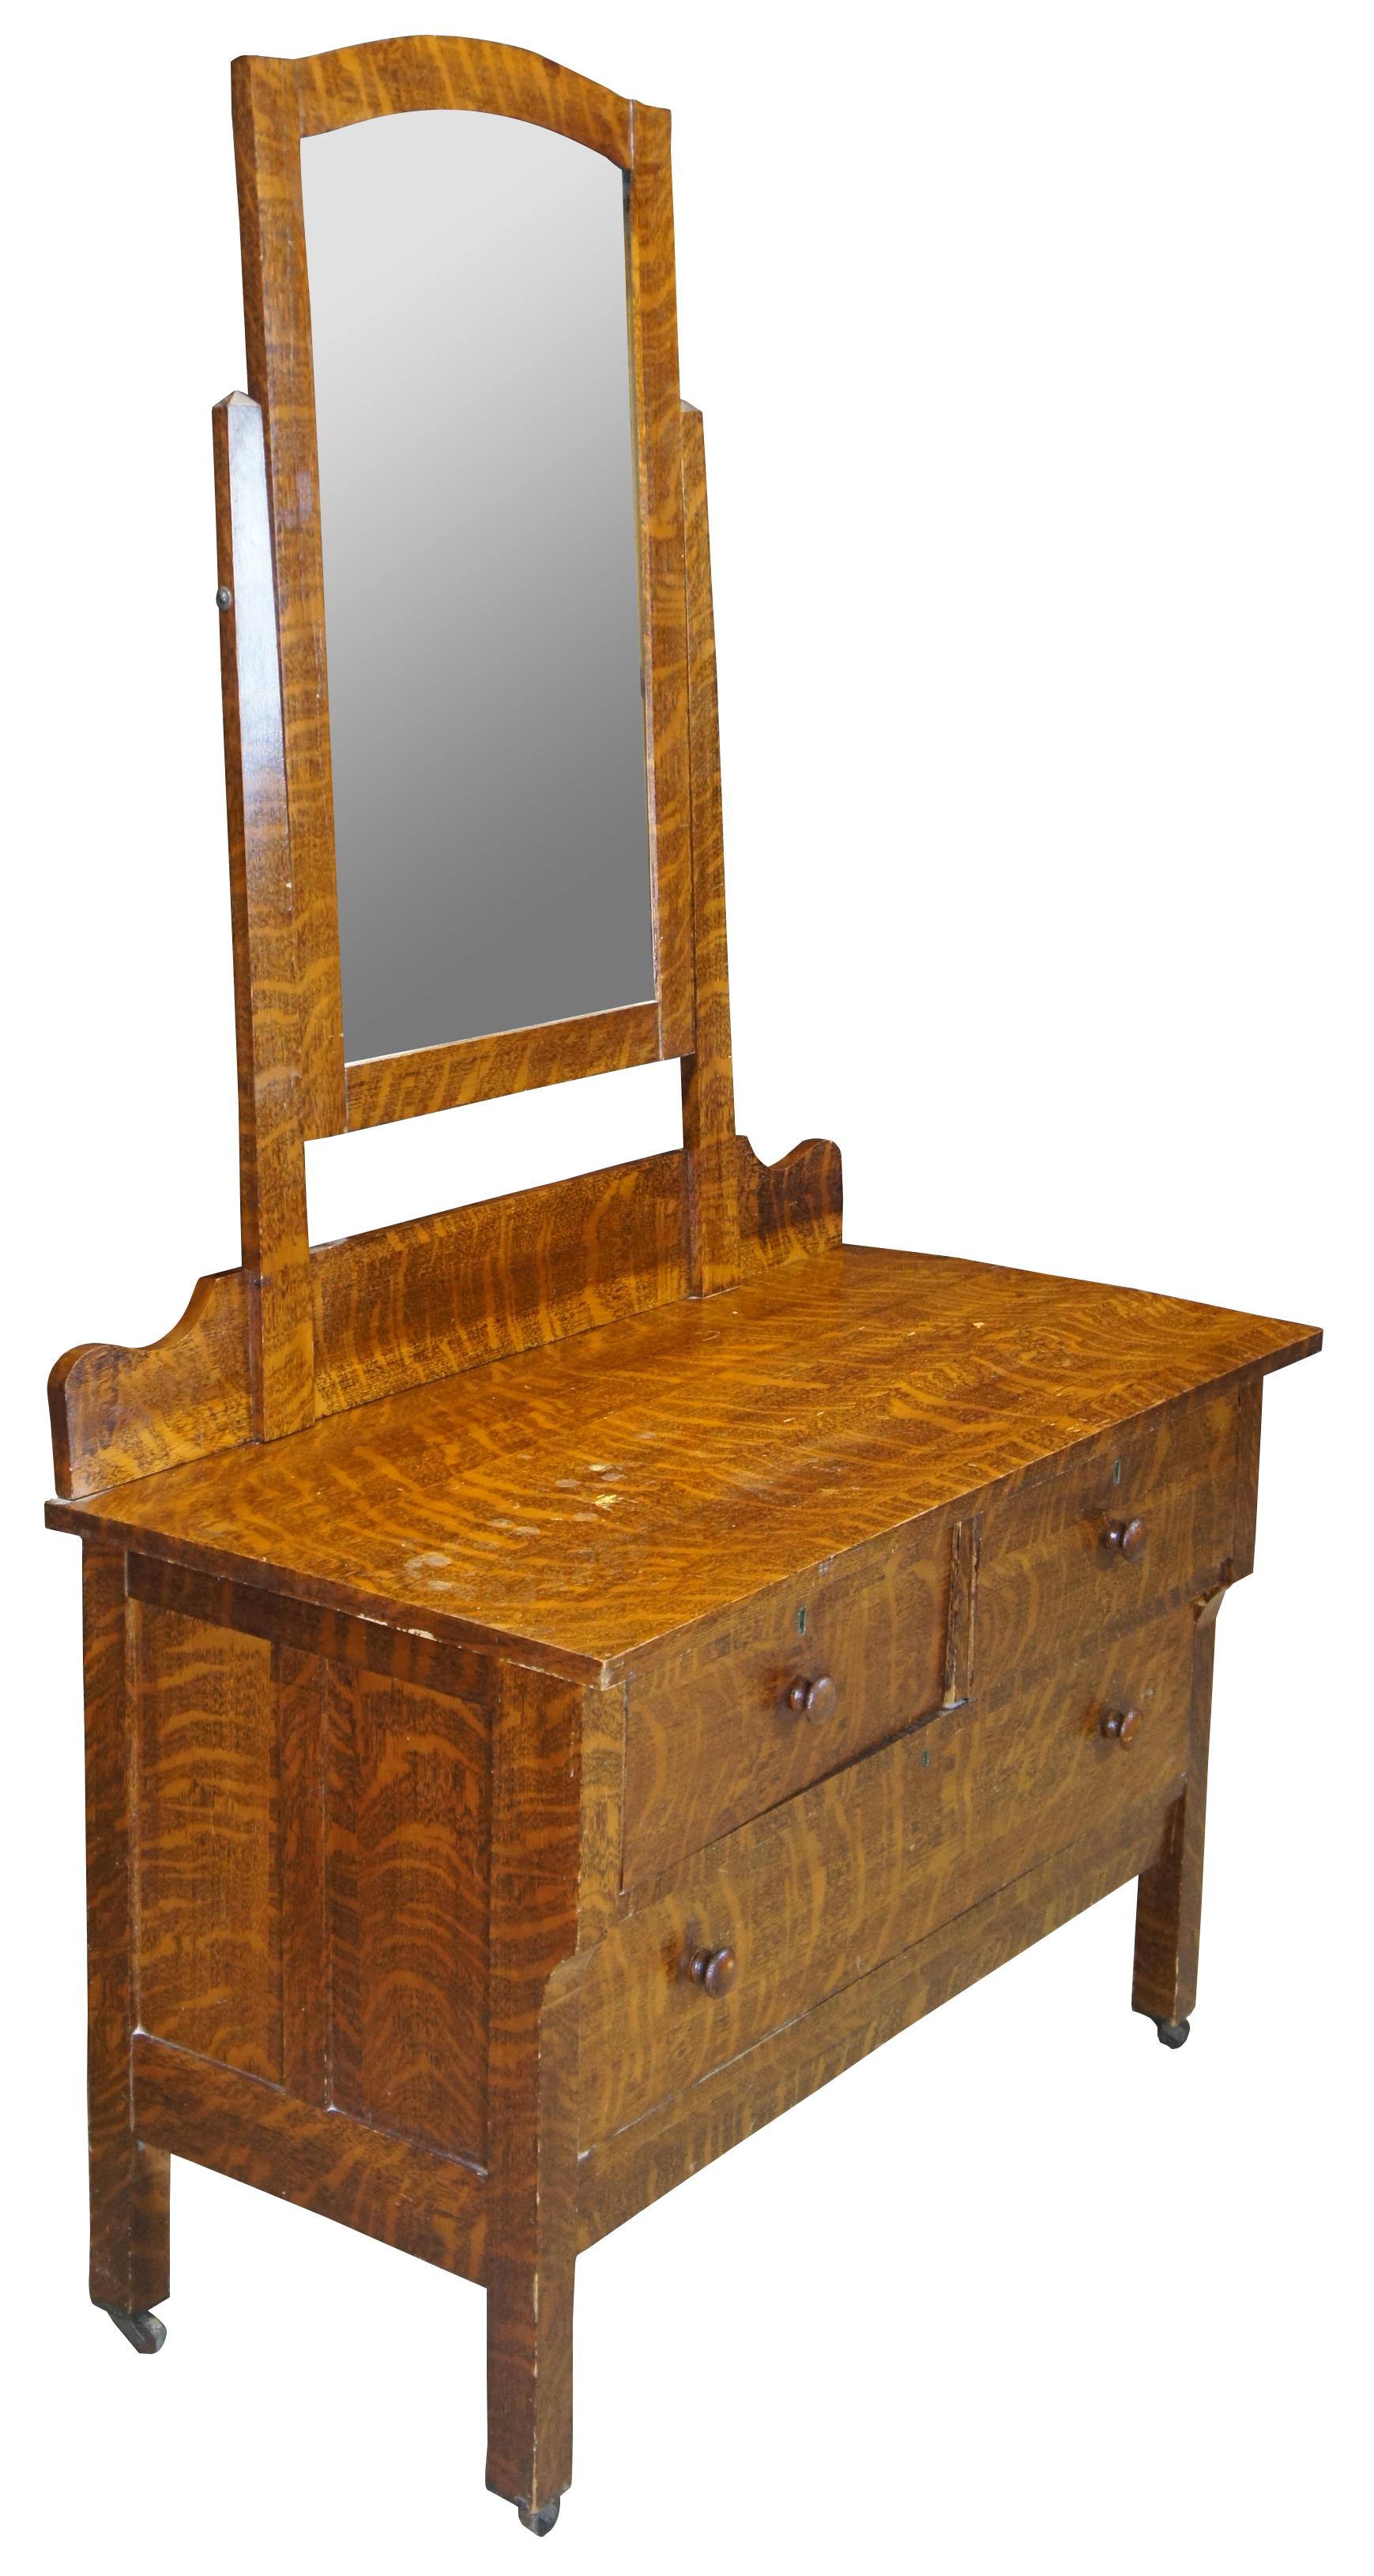 Circa 1880s quartersawn oak dresser with adjustable mirror. Features 3 drawers with pin and cove/knapp joint construction. 

The Knapp joint was developed during the late Victoria Era in post Civil War United States. Patented by Charles Knapp of